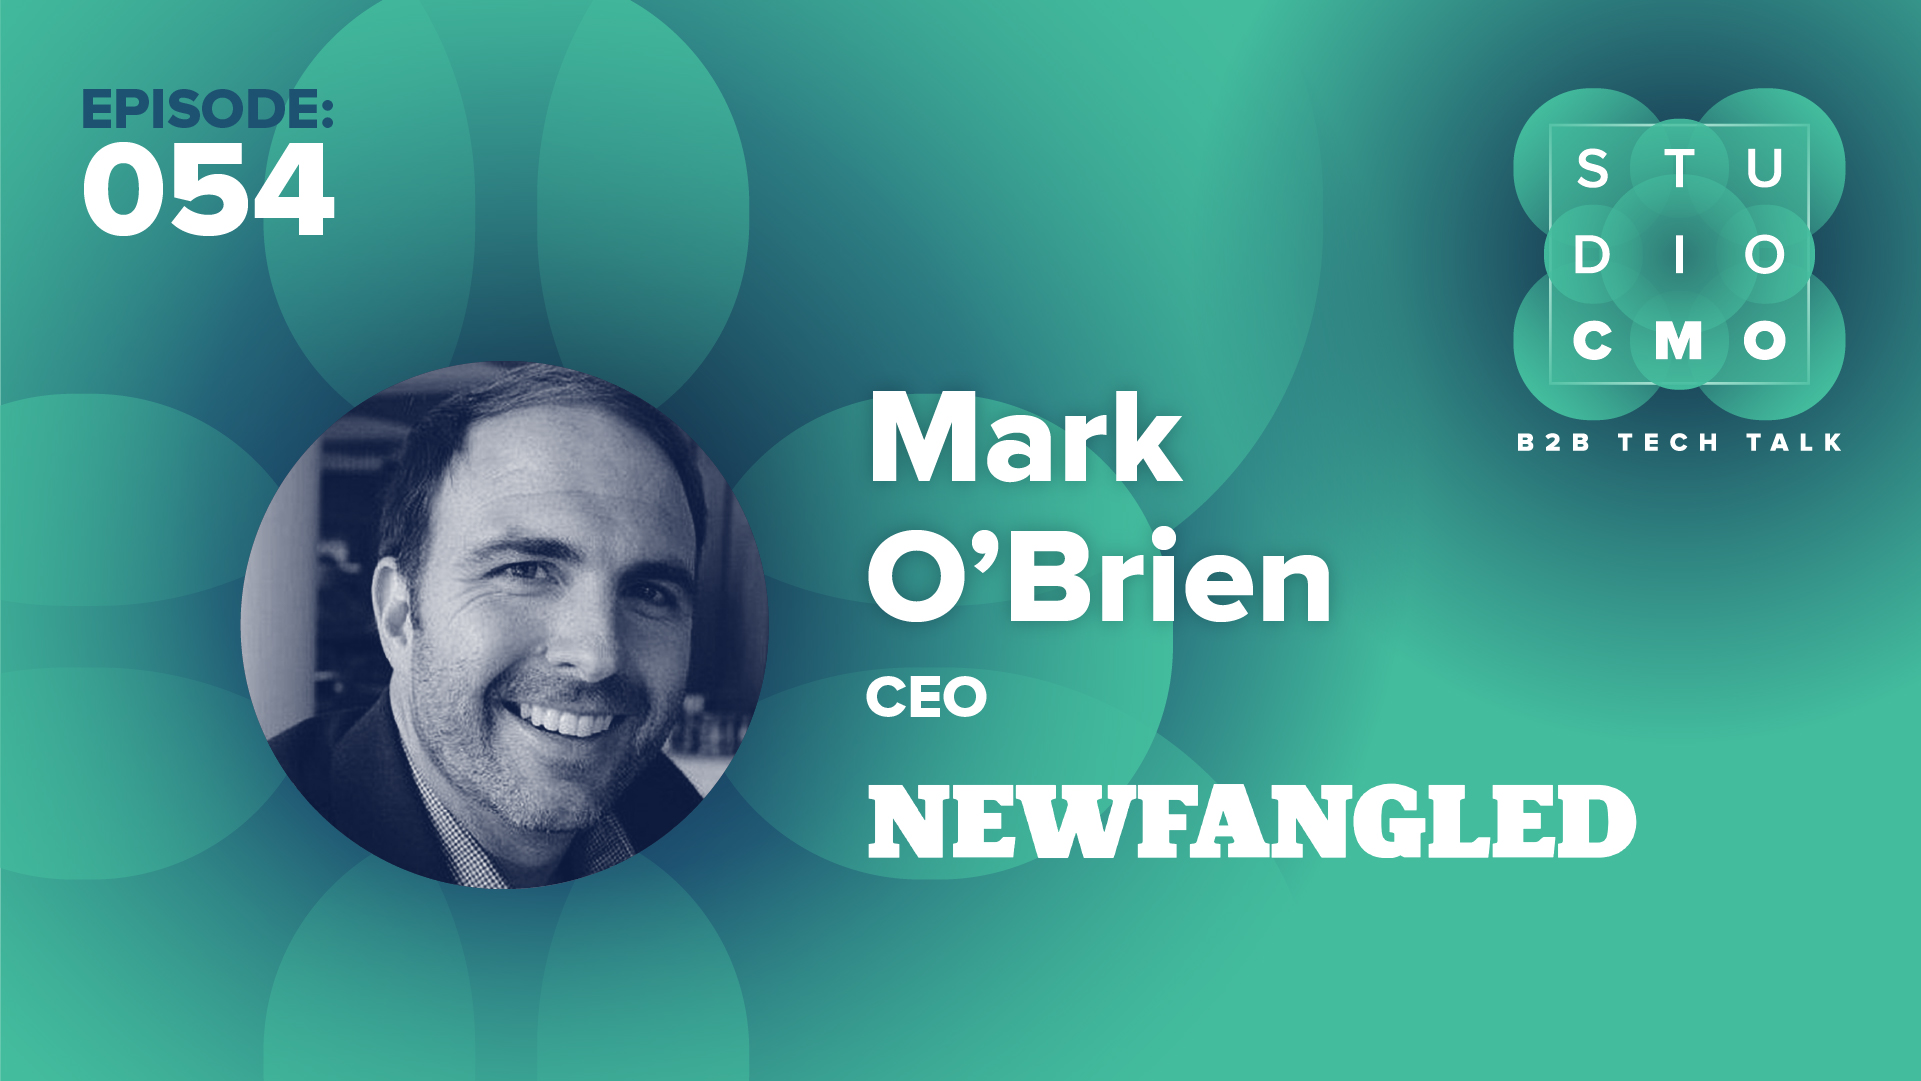 Positioning is the art of articulating your unique value proposition to connect with a prospect. Newfangled's CEO, Mark O'Brien, discusses on Studio CMO.